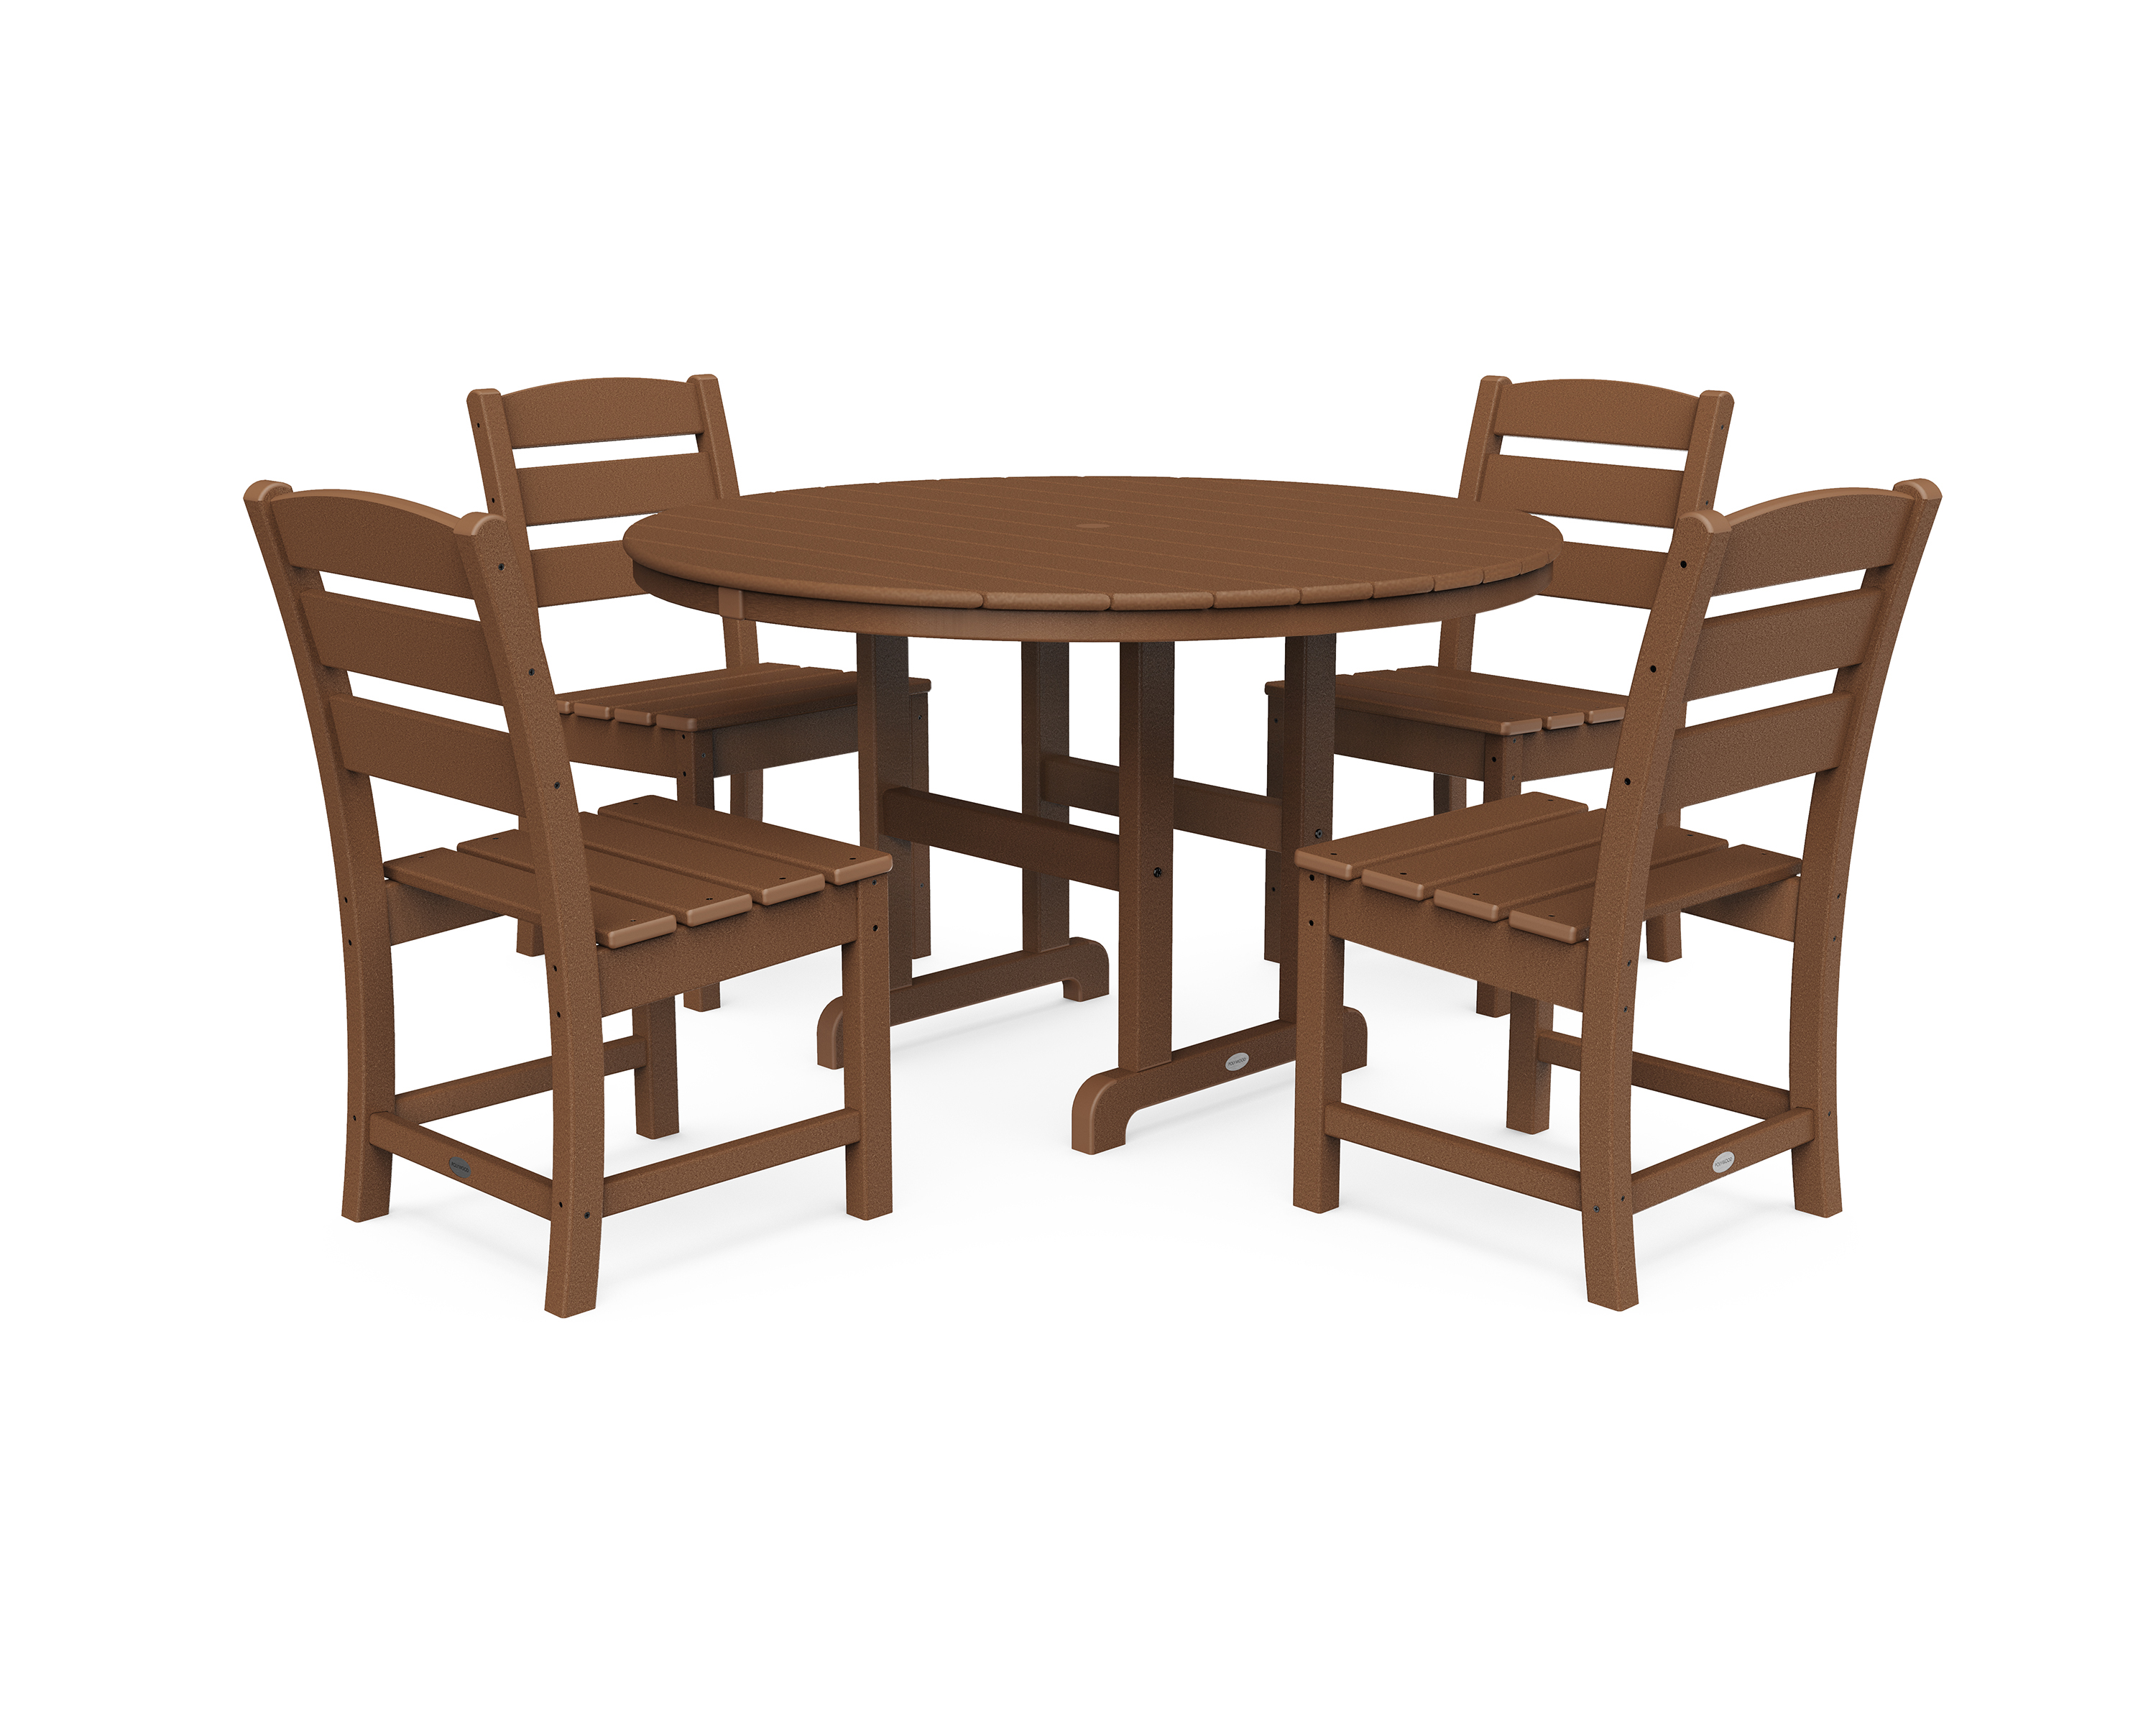 POLYWOOD Lakeside 5-Piece Round Side Chair Dining Set in Teak - image 1 of 2